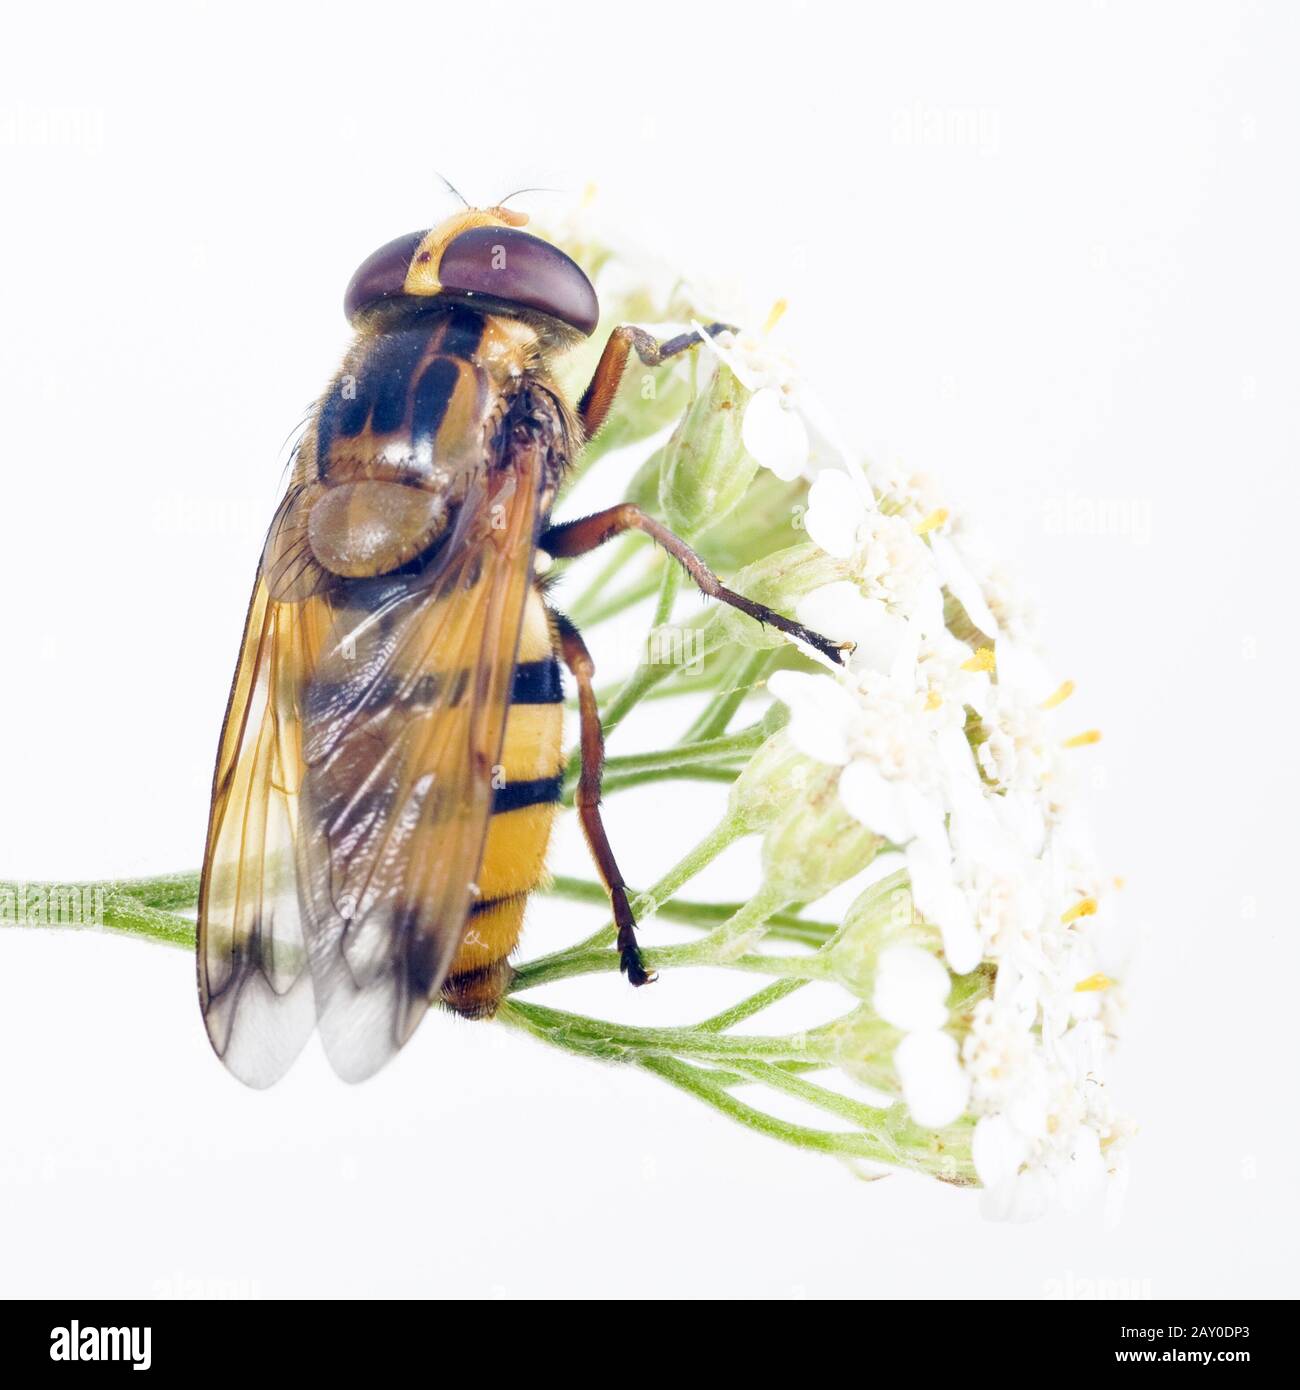 Banded Forest Hoverfly (Volucella inanis) - Hoverfly (Volucella inanis) Stock Photo